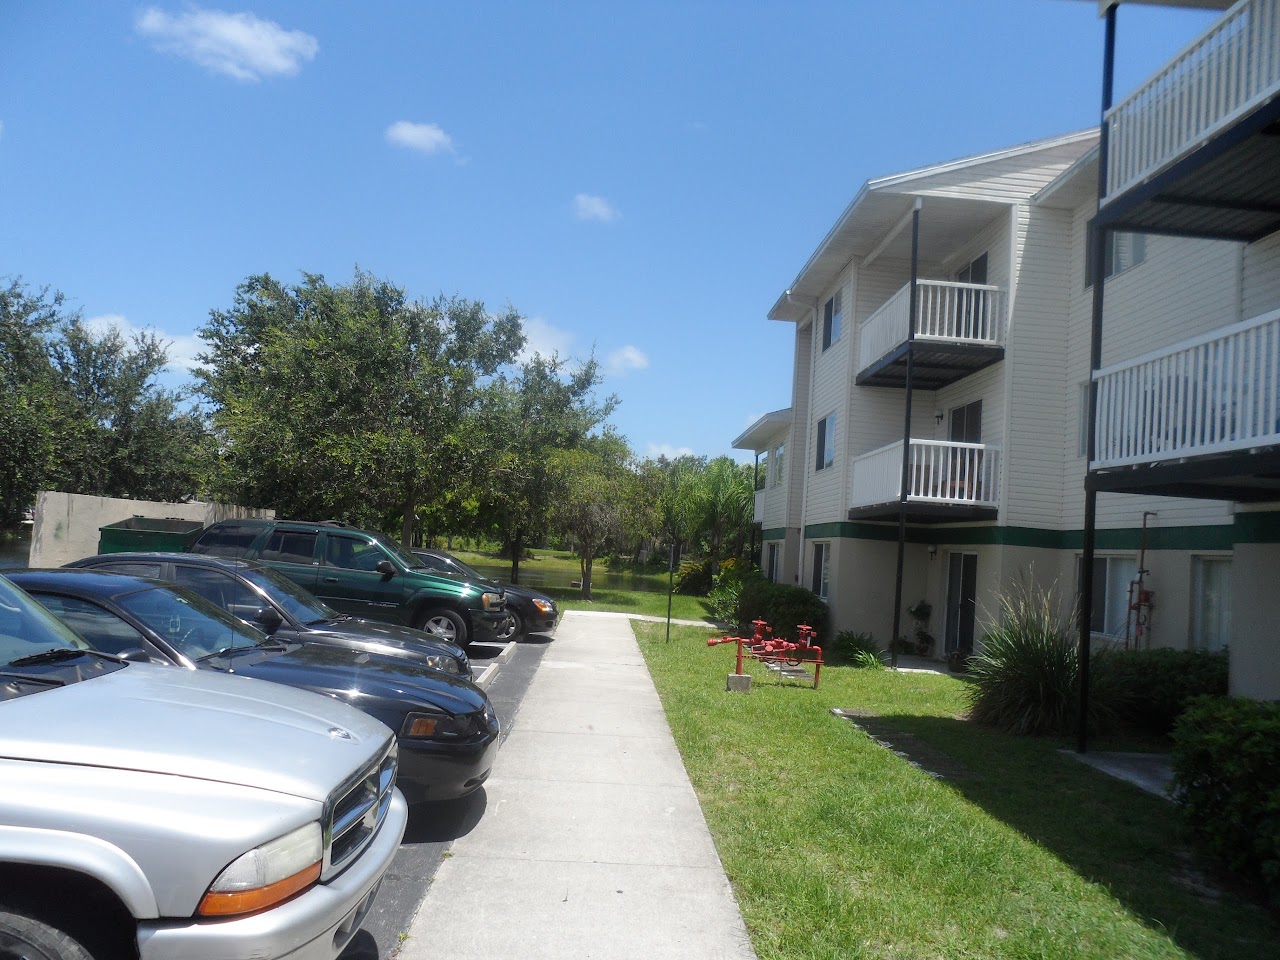 Photo of PRESERVE AT OSLO. Affordable housing located at 2299 TENTH RD SW VERO BEACH, FL 32962